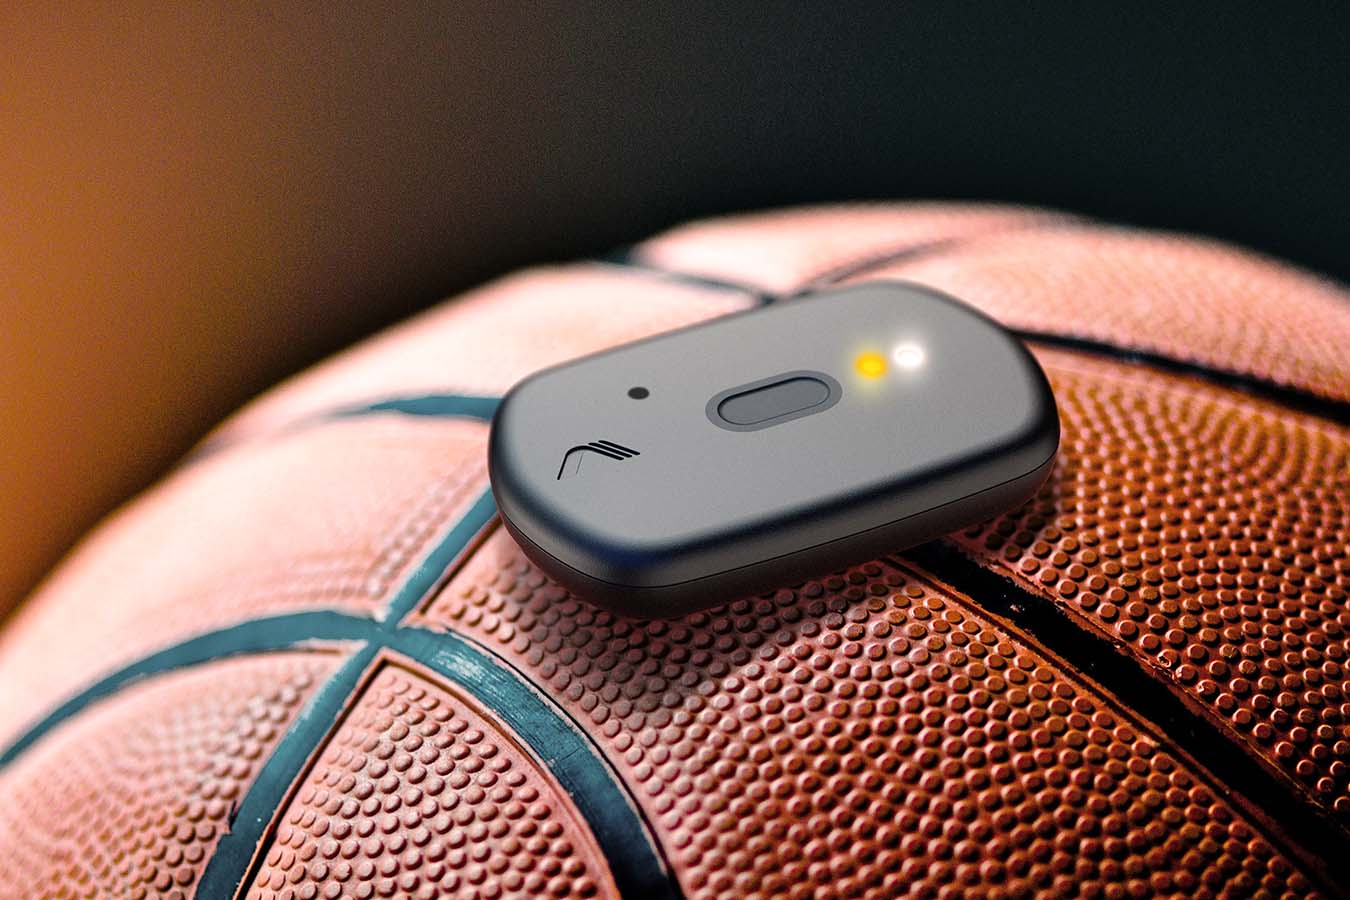 A visualisation of the T7 device sitting on top of a basketball. The image is a close up with lots of detail.